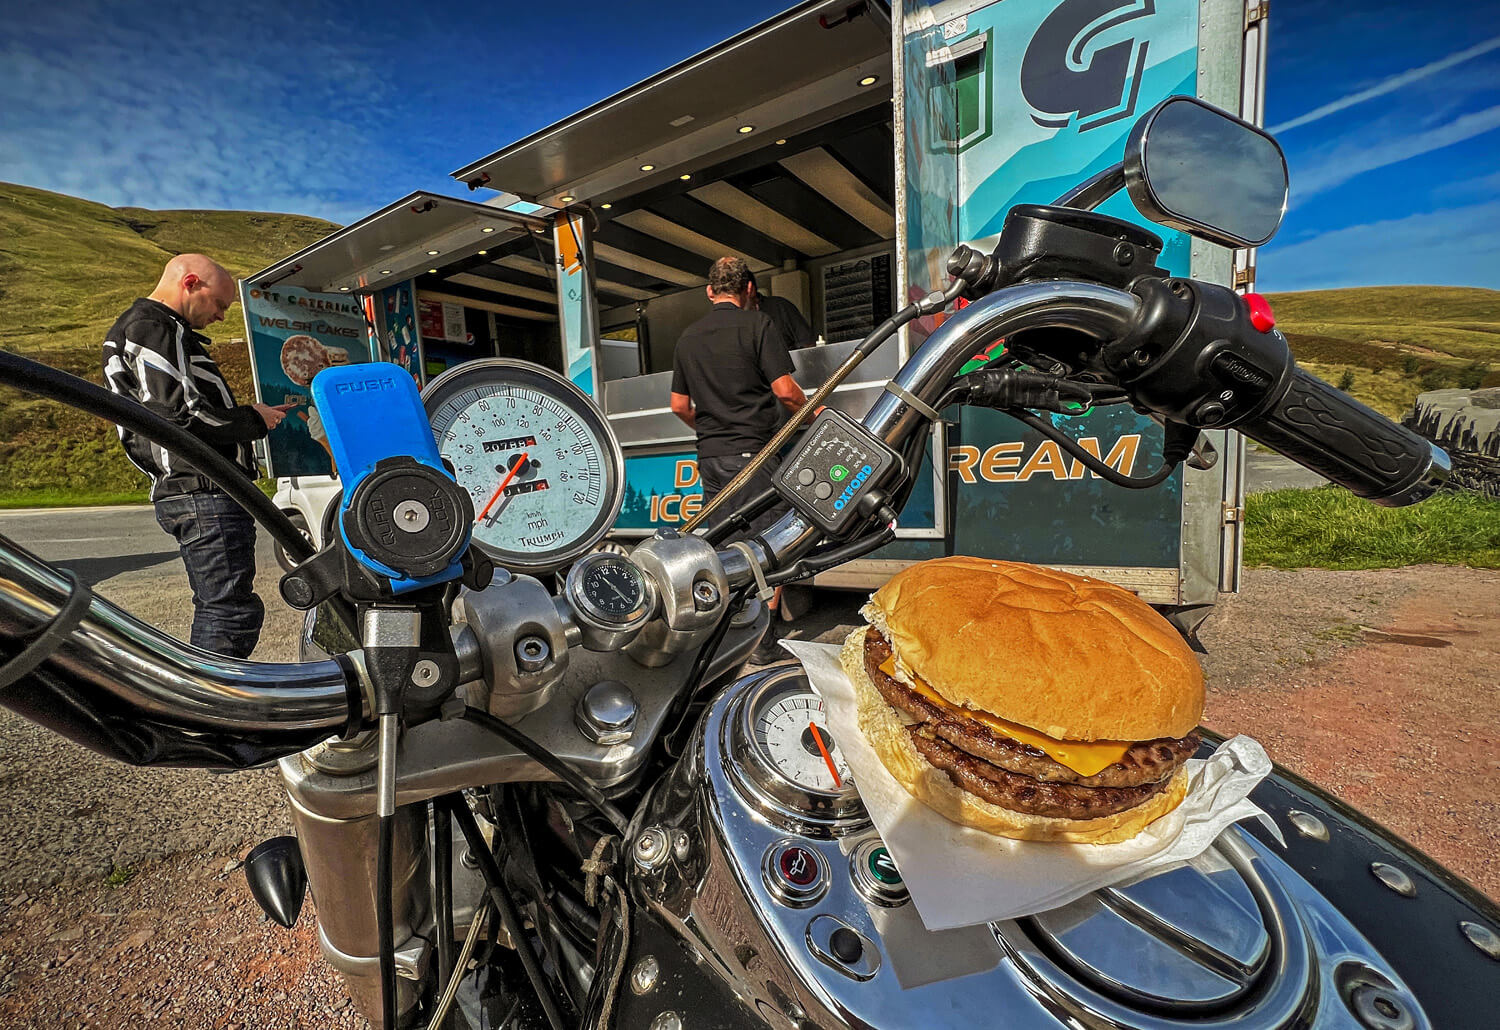 From the rider's perspective, the image showcases a tantalizing cheeseburger resting on a motorcycle tank in clear weather. The bike's chrome details gleam under the sunlight, and a food truck and fellow biker are visible in the background, suggesting a roadside stop during a journey.